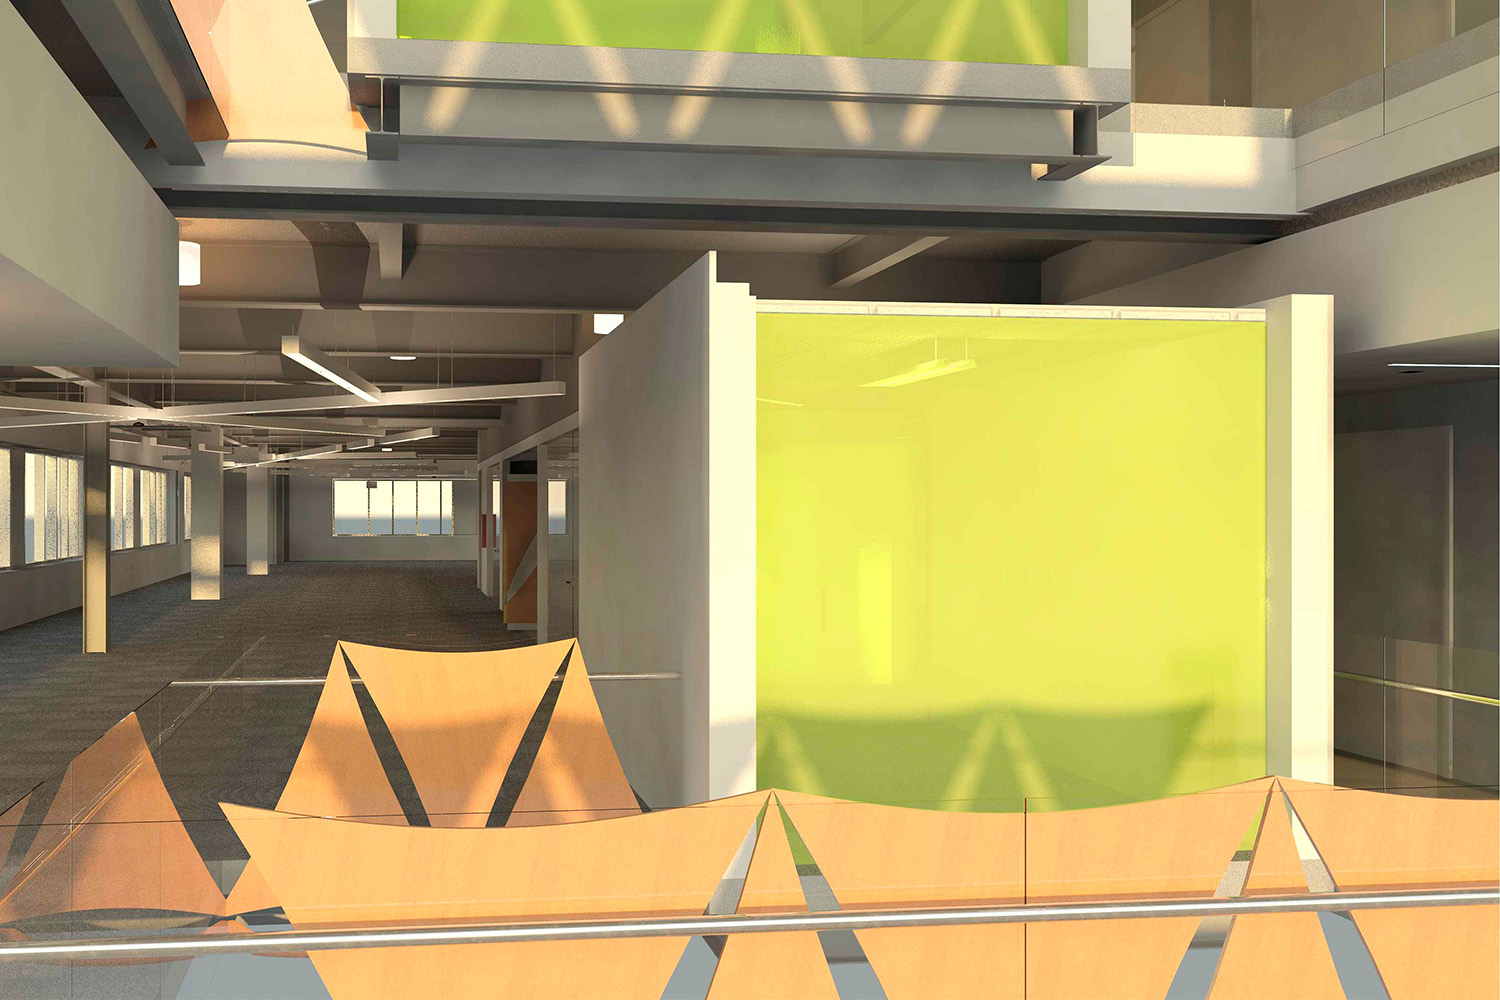 Rendering of Autodesk Headquarters from the VDC team. A "floating" office cubicle is featured in the render, along with bamboo accents.